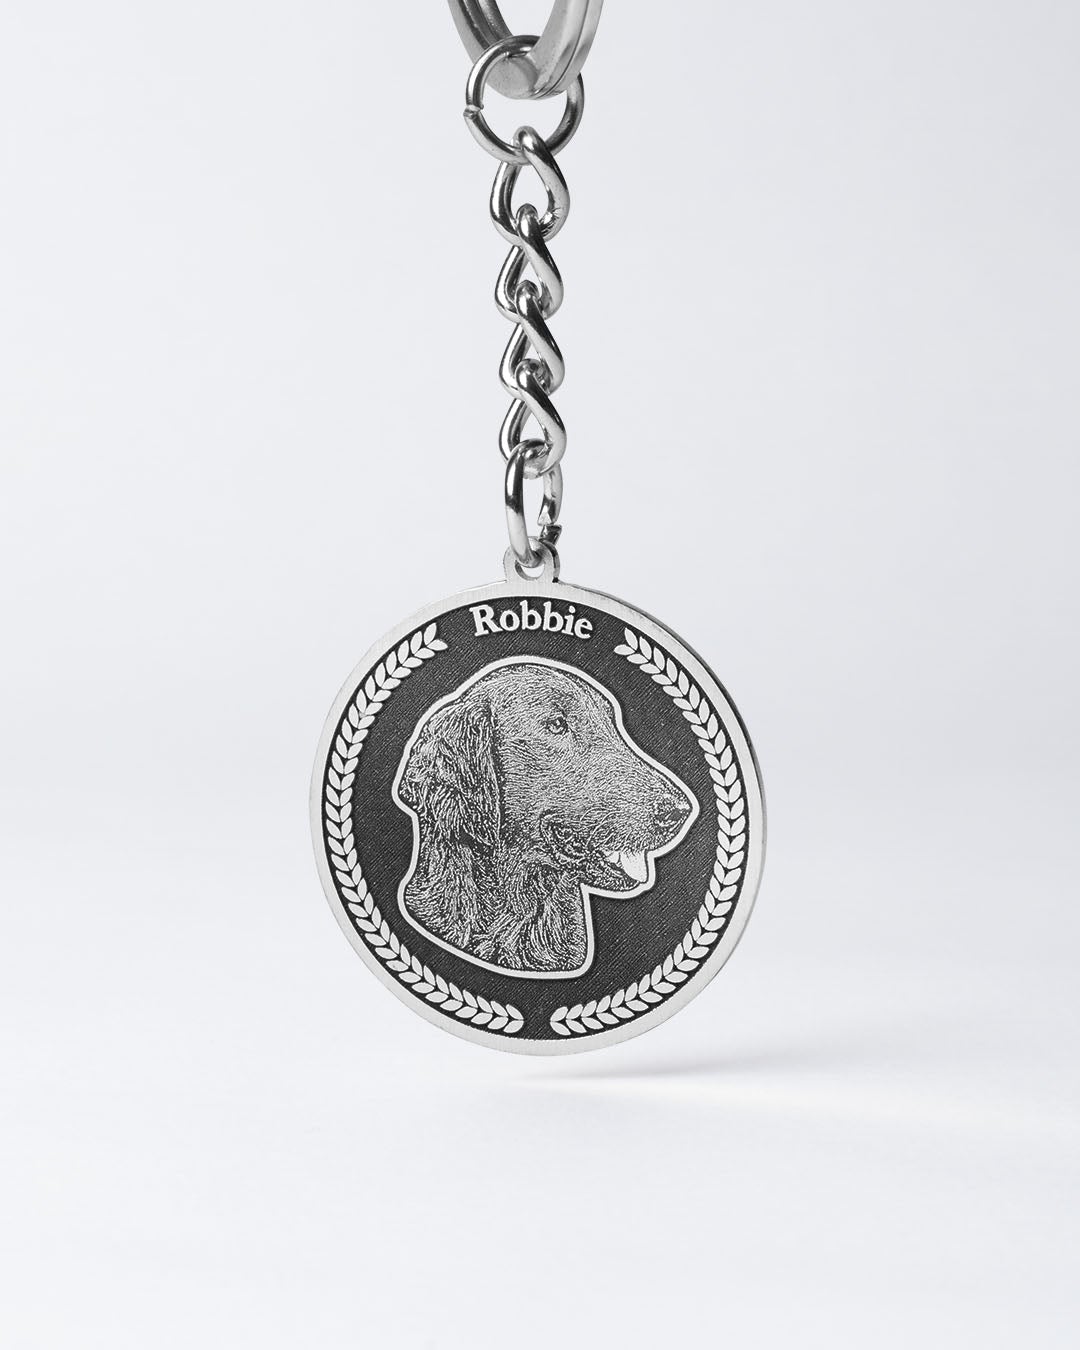 Dog memorial gifts, silver medallion dog memorial keychain